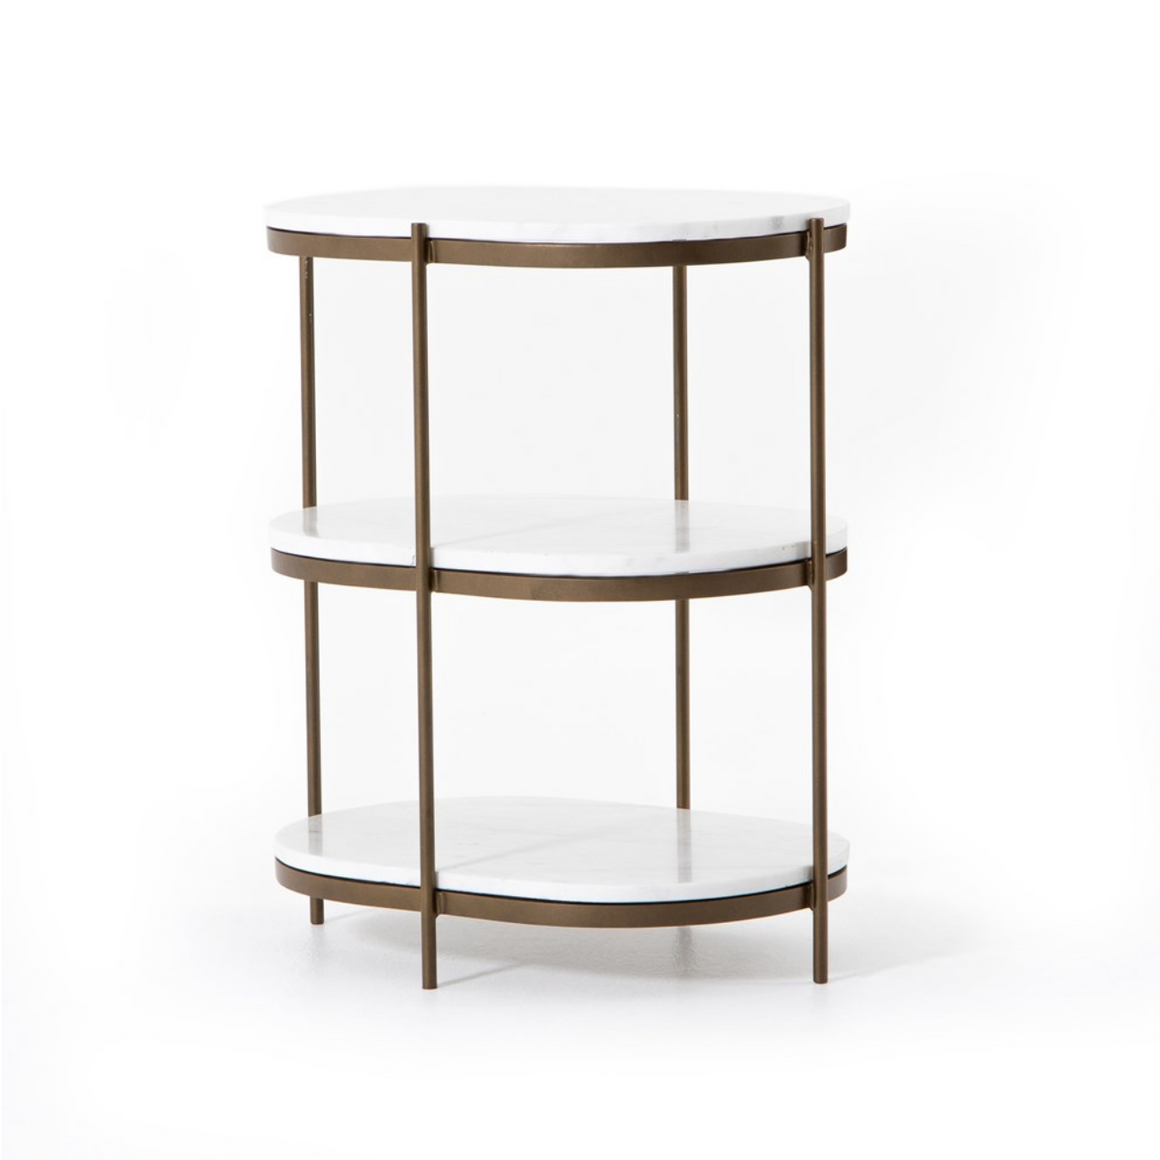 Felipe 22" Marble Nightstand - Antique Brass + Polished White